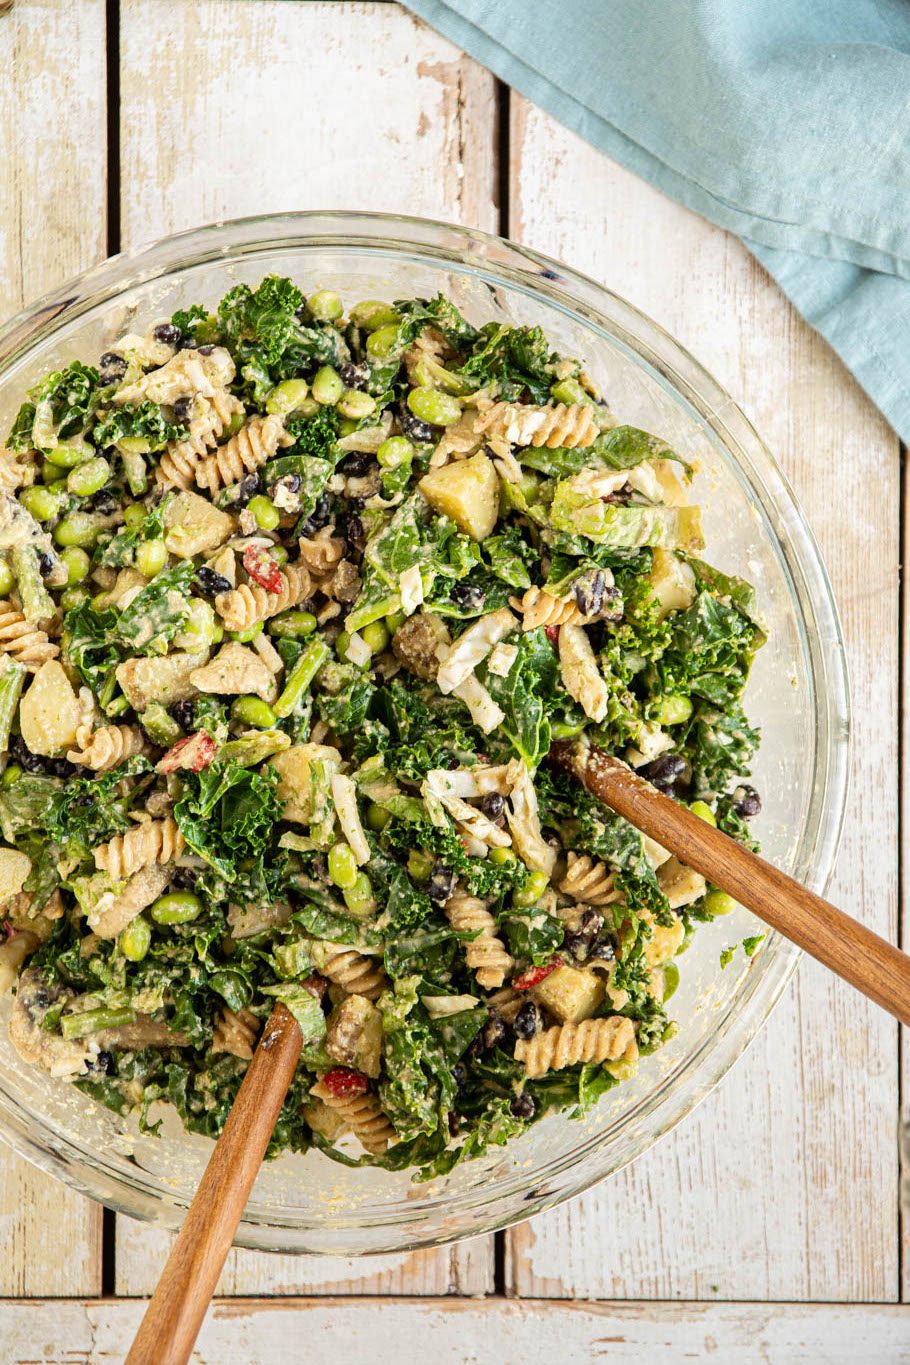 Learn how to make a quick and easy, balanced, delicious, and nutritious kale salad for the whole family.